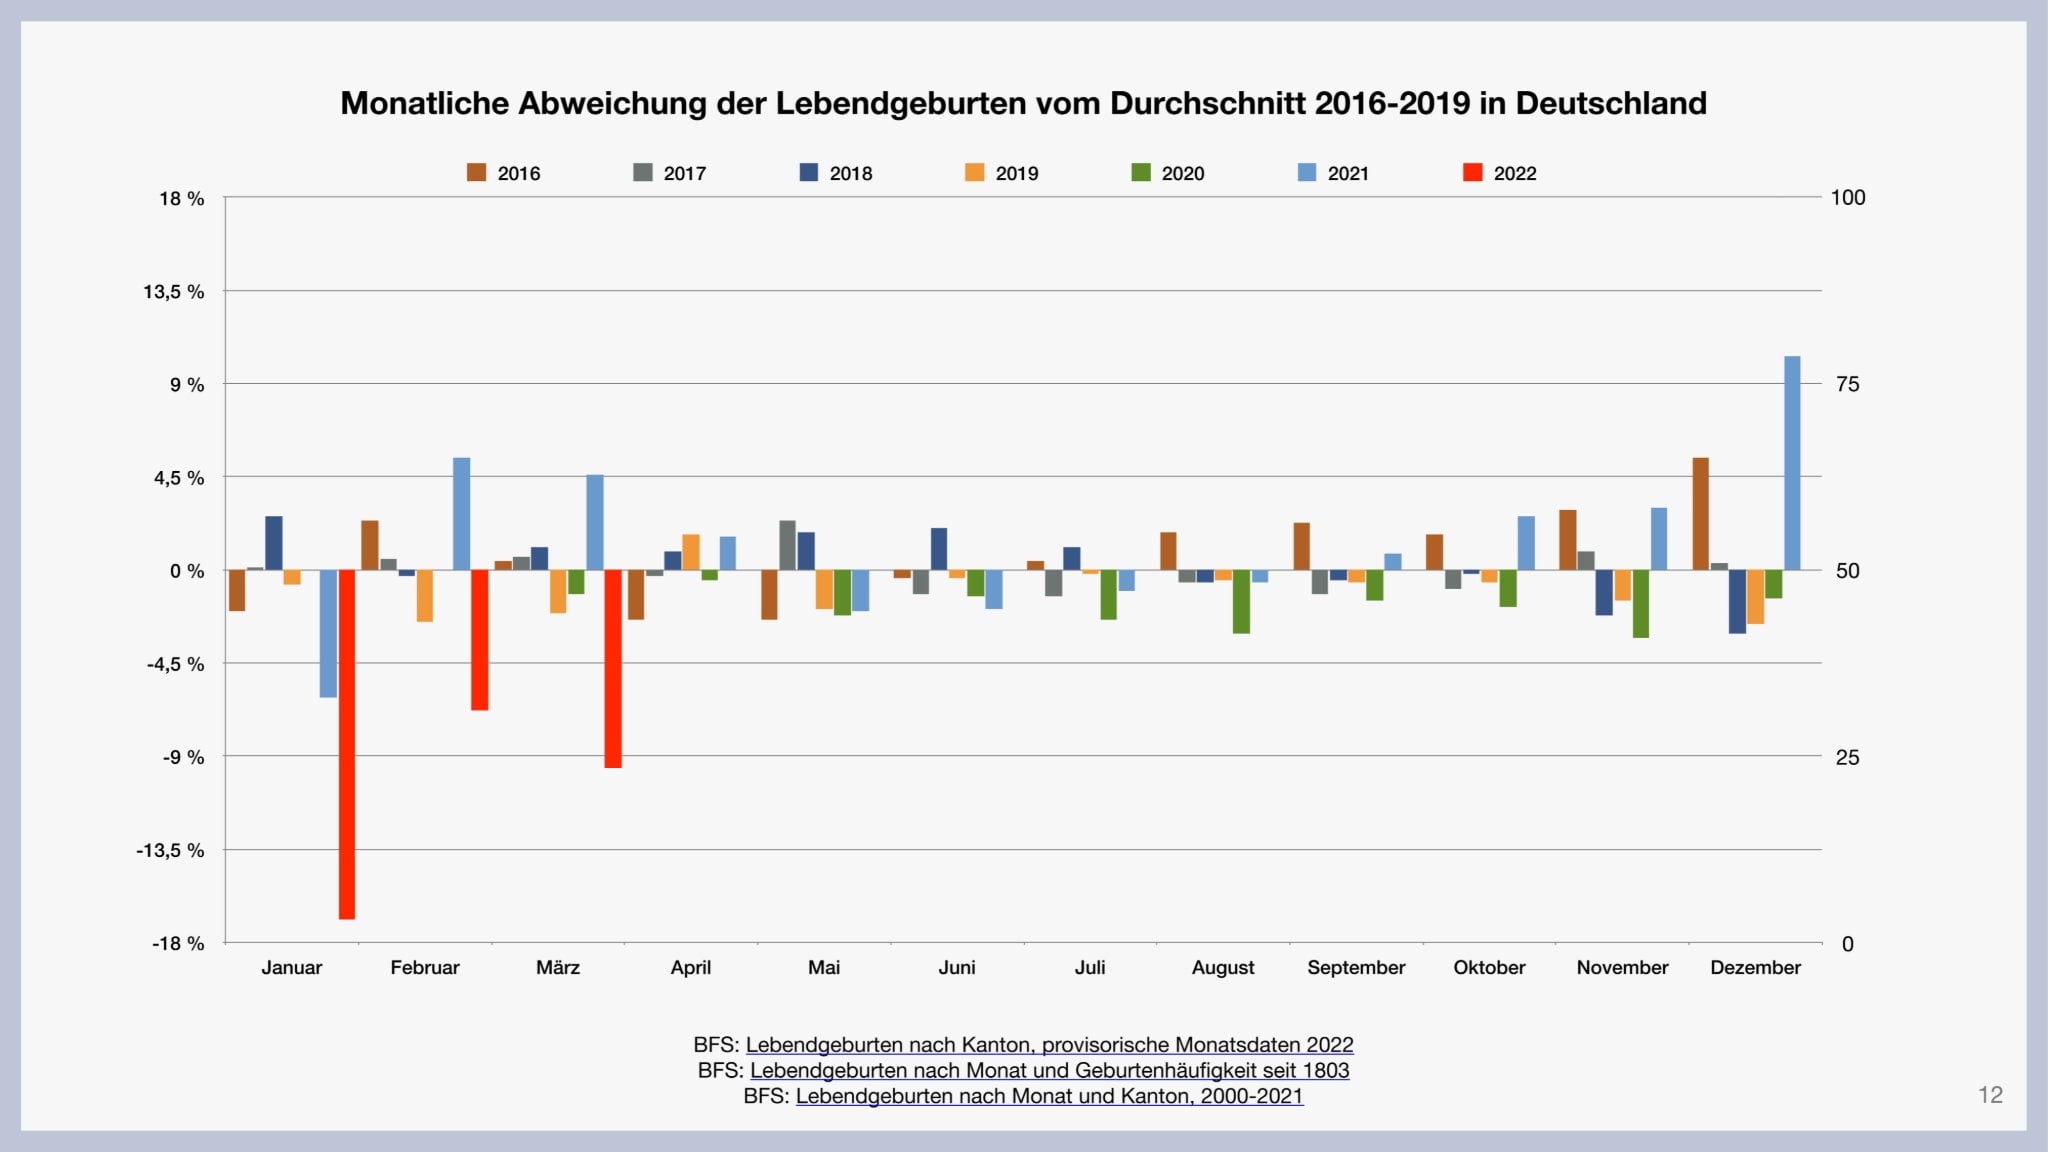 Birth rate developments in Switzerland and Germany in 2022...